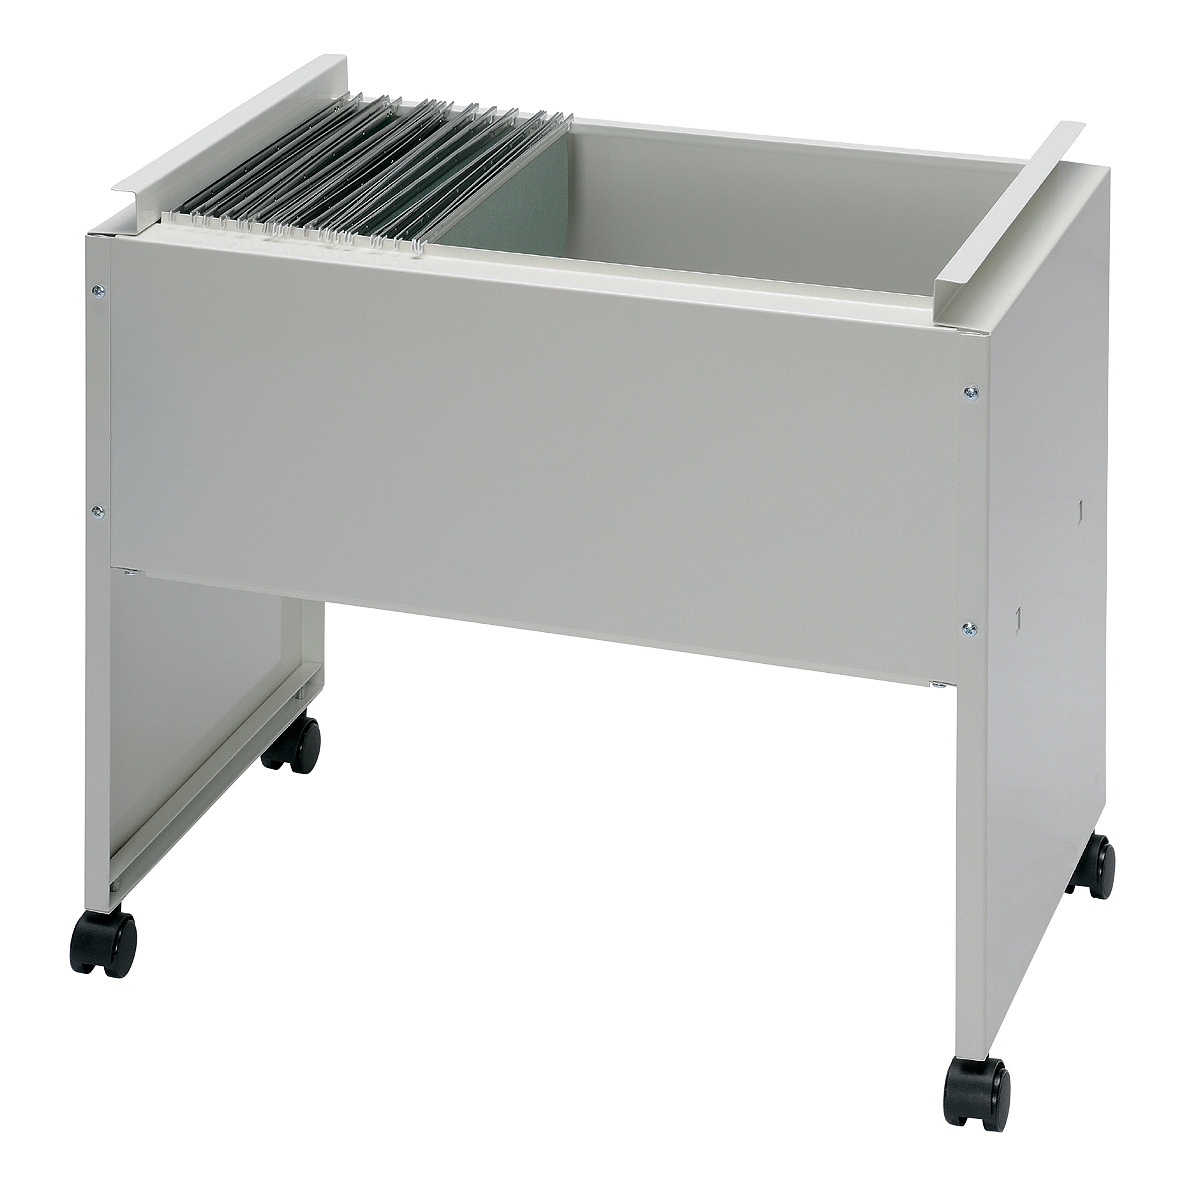 NO-NAME Universal Filing Trolley Gry